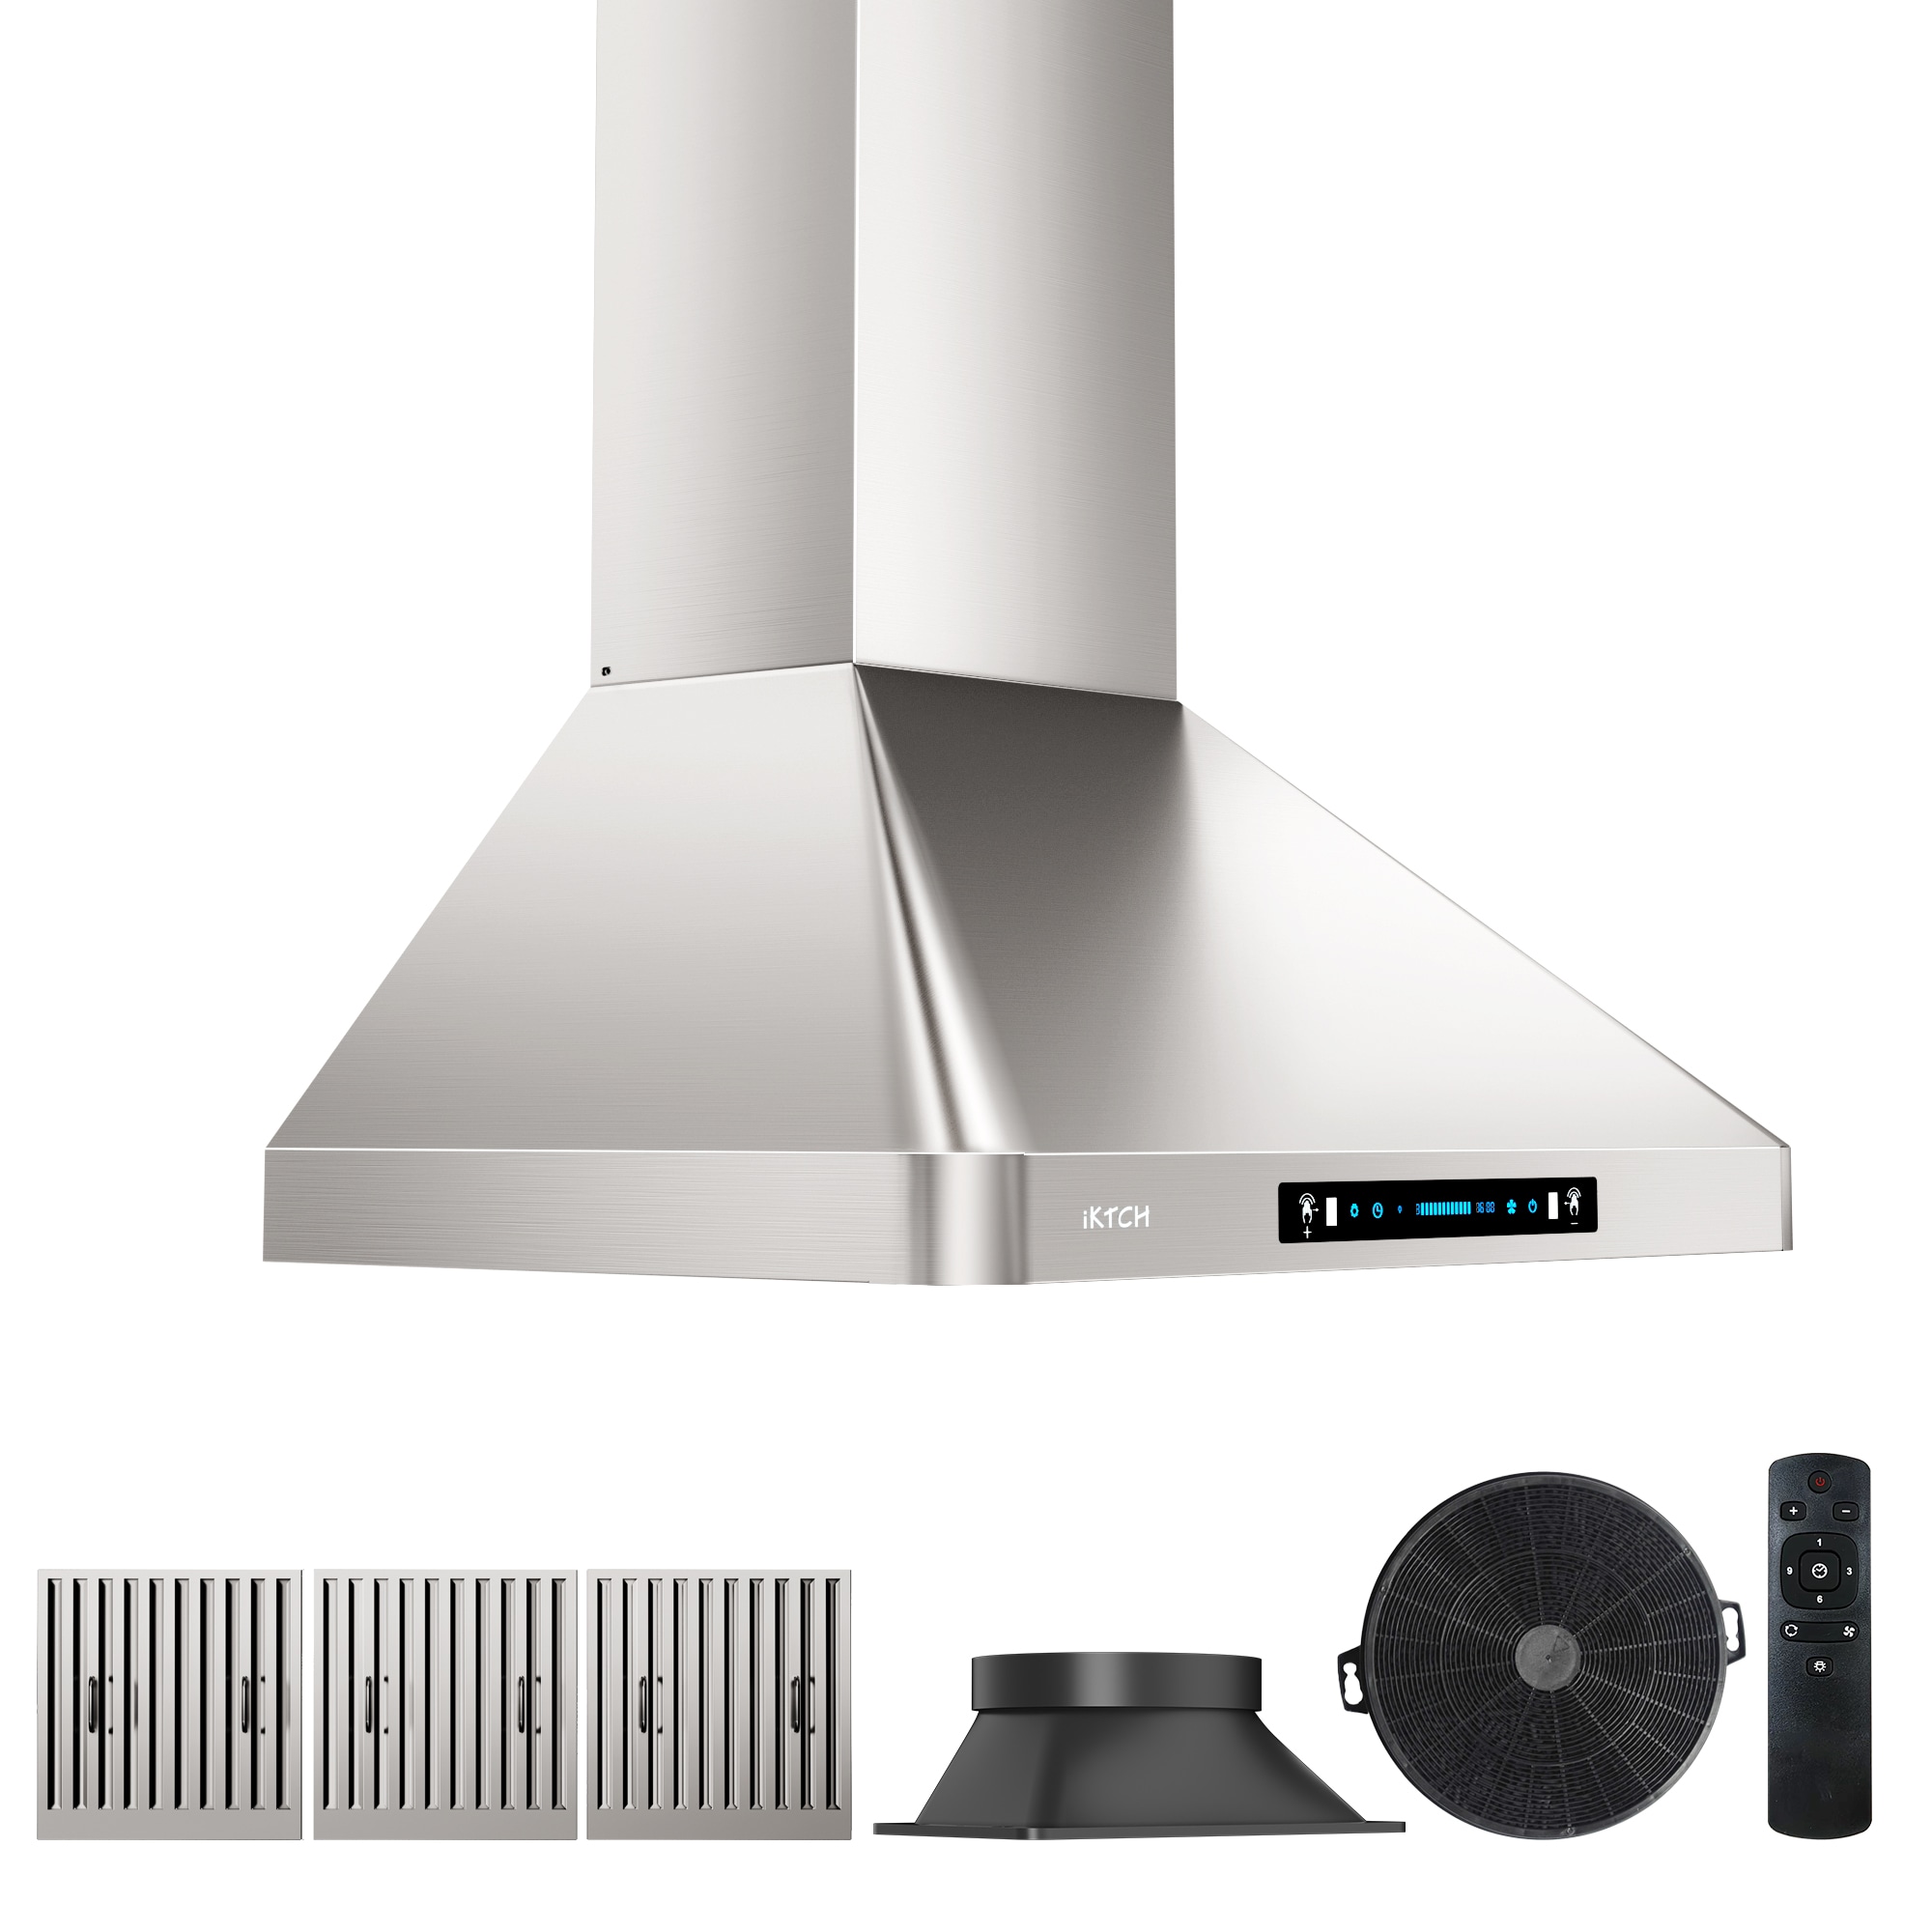 IKTCH 36-in 900-CFM Ducted Stainless Steel Wall-Mounted Range Hood with Charcoal Filter | IKP02-36